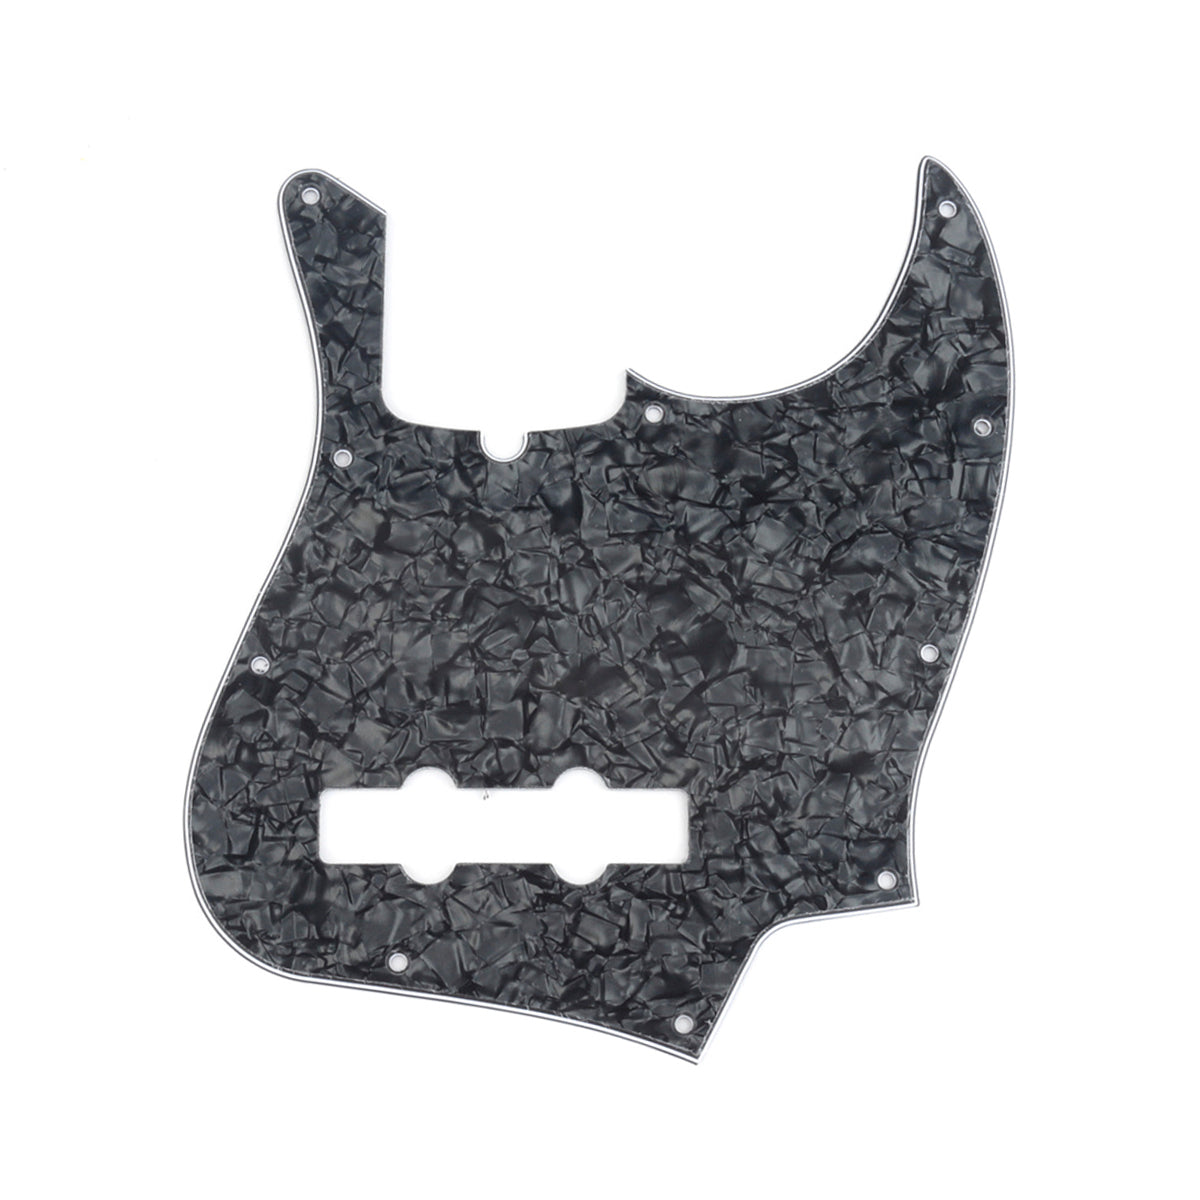 Musiclily Pro 10-Hole Modern Style J Bass Pickguard for 4 String American Jazz Bass, 4Ply Black Pearl